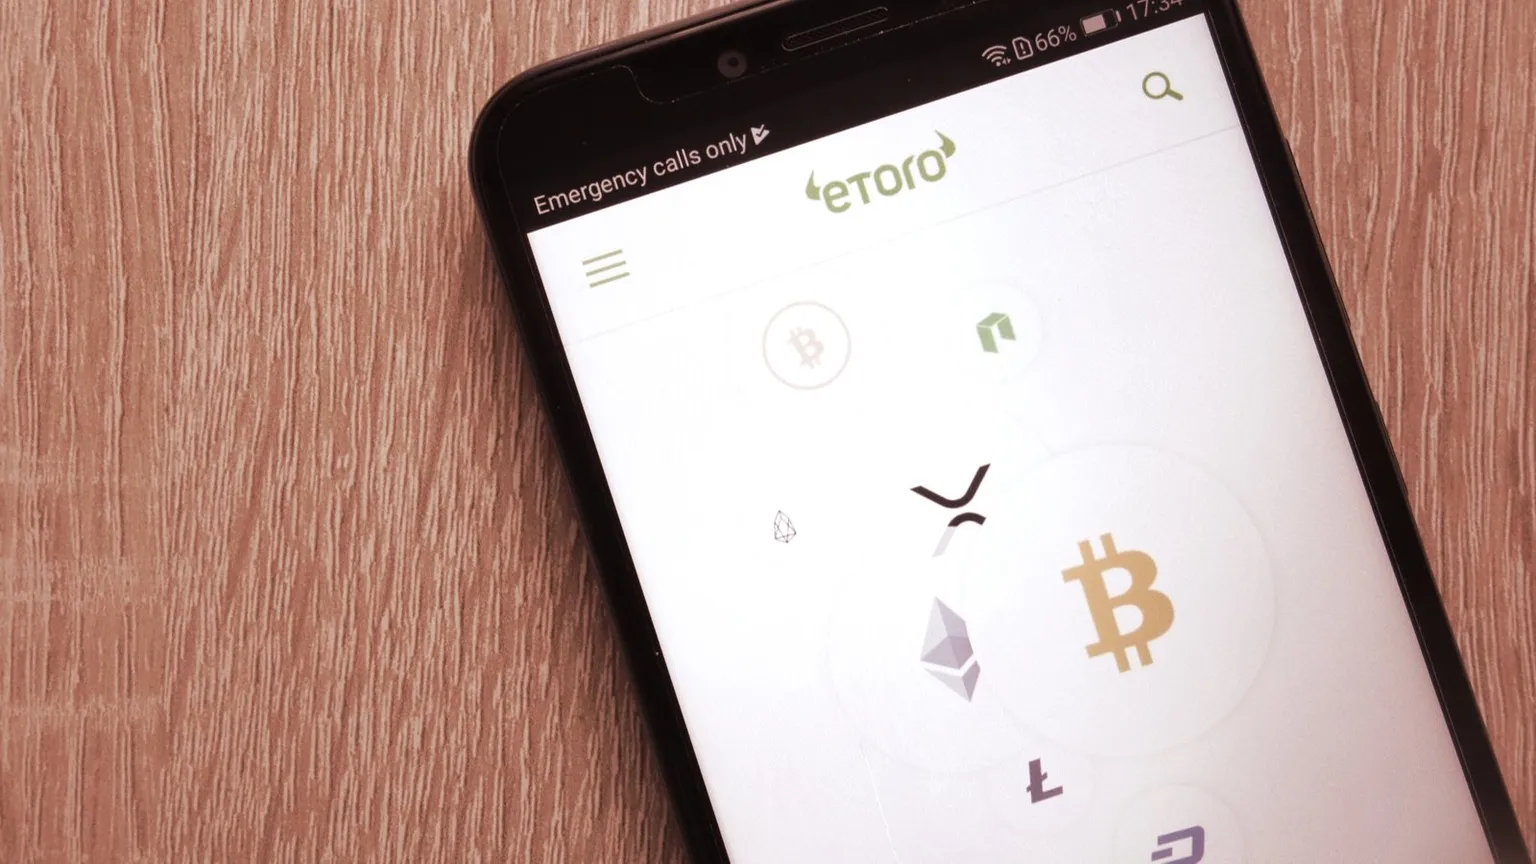 etoro enables staking service for tron (TRX) and cardano (ADA). Image: Shutterstock